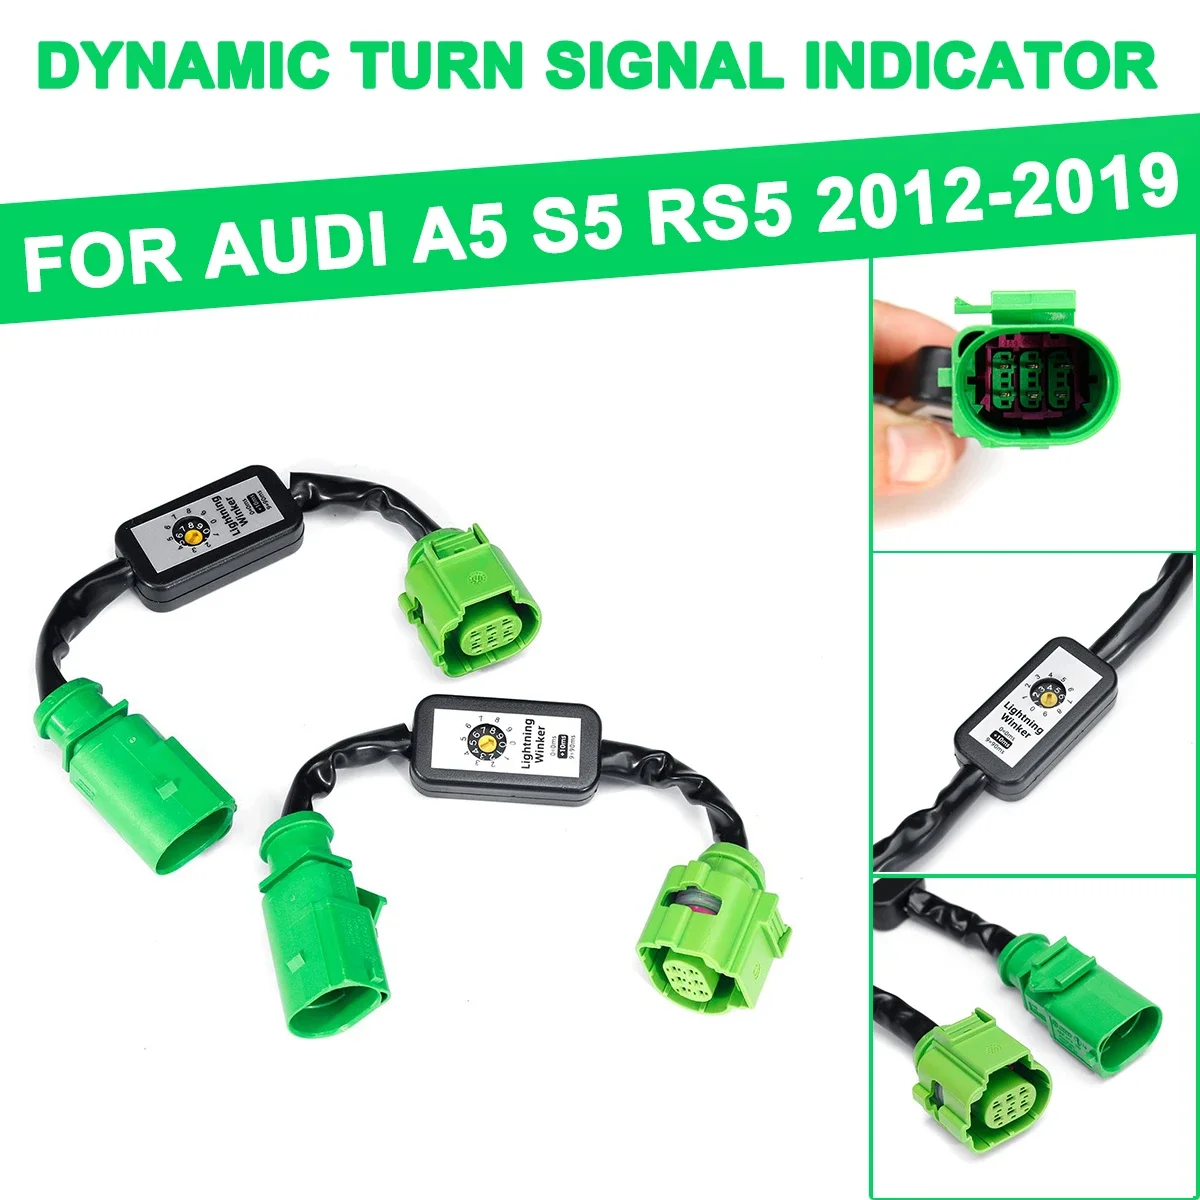 

LED Taillight Add-on Module Cable Dynamic Turn Signal Indicator For Audi A5 S5 RS5 2012 2013 2014 2015 2016 2017 2018 2019